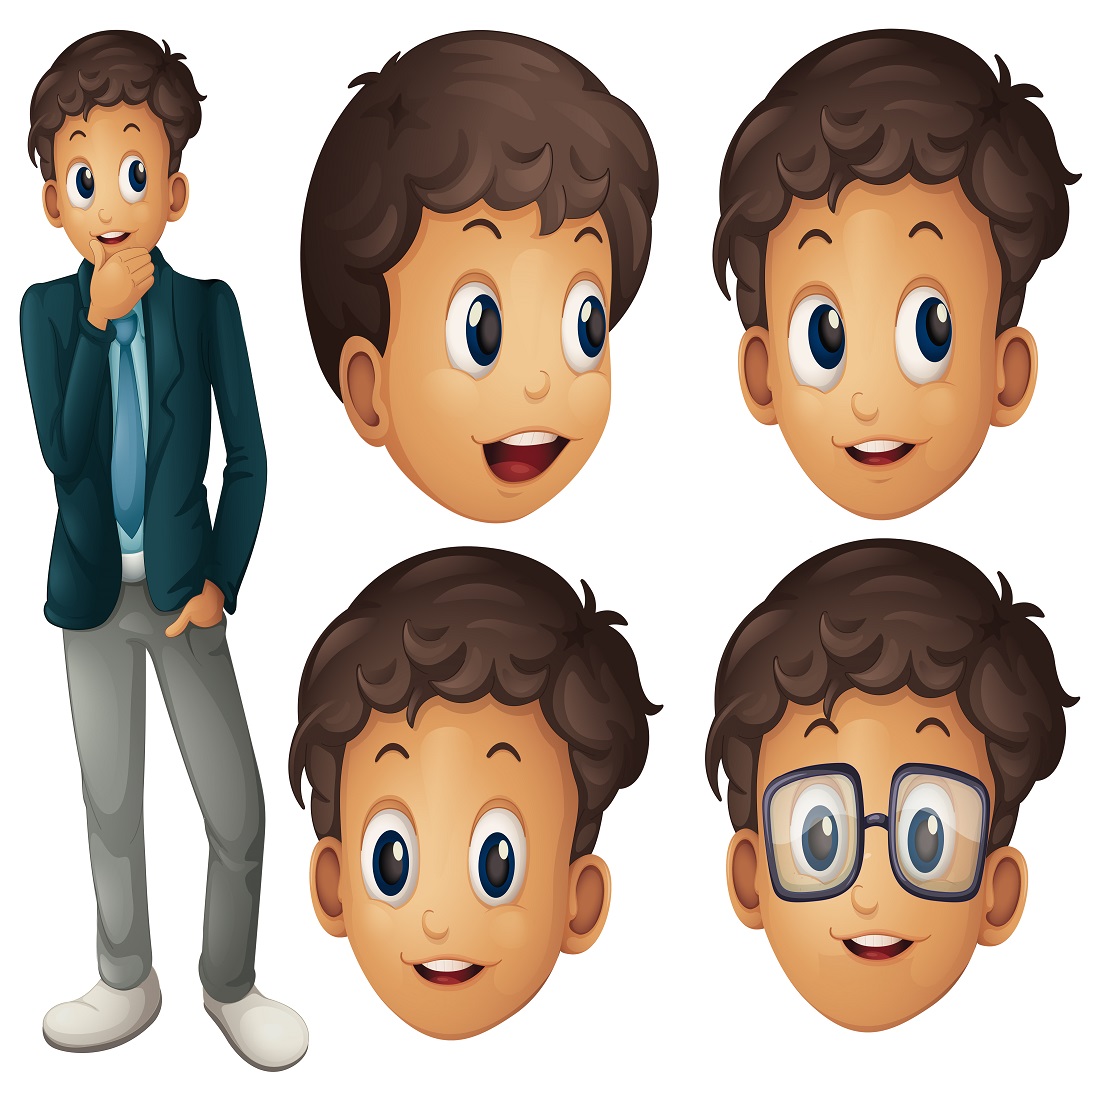 Man suit with different facial expressions cover image.